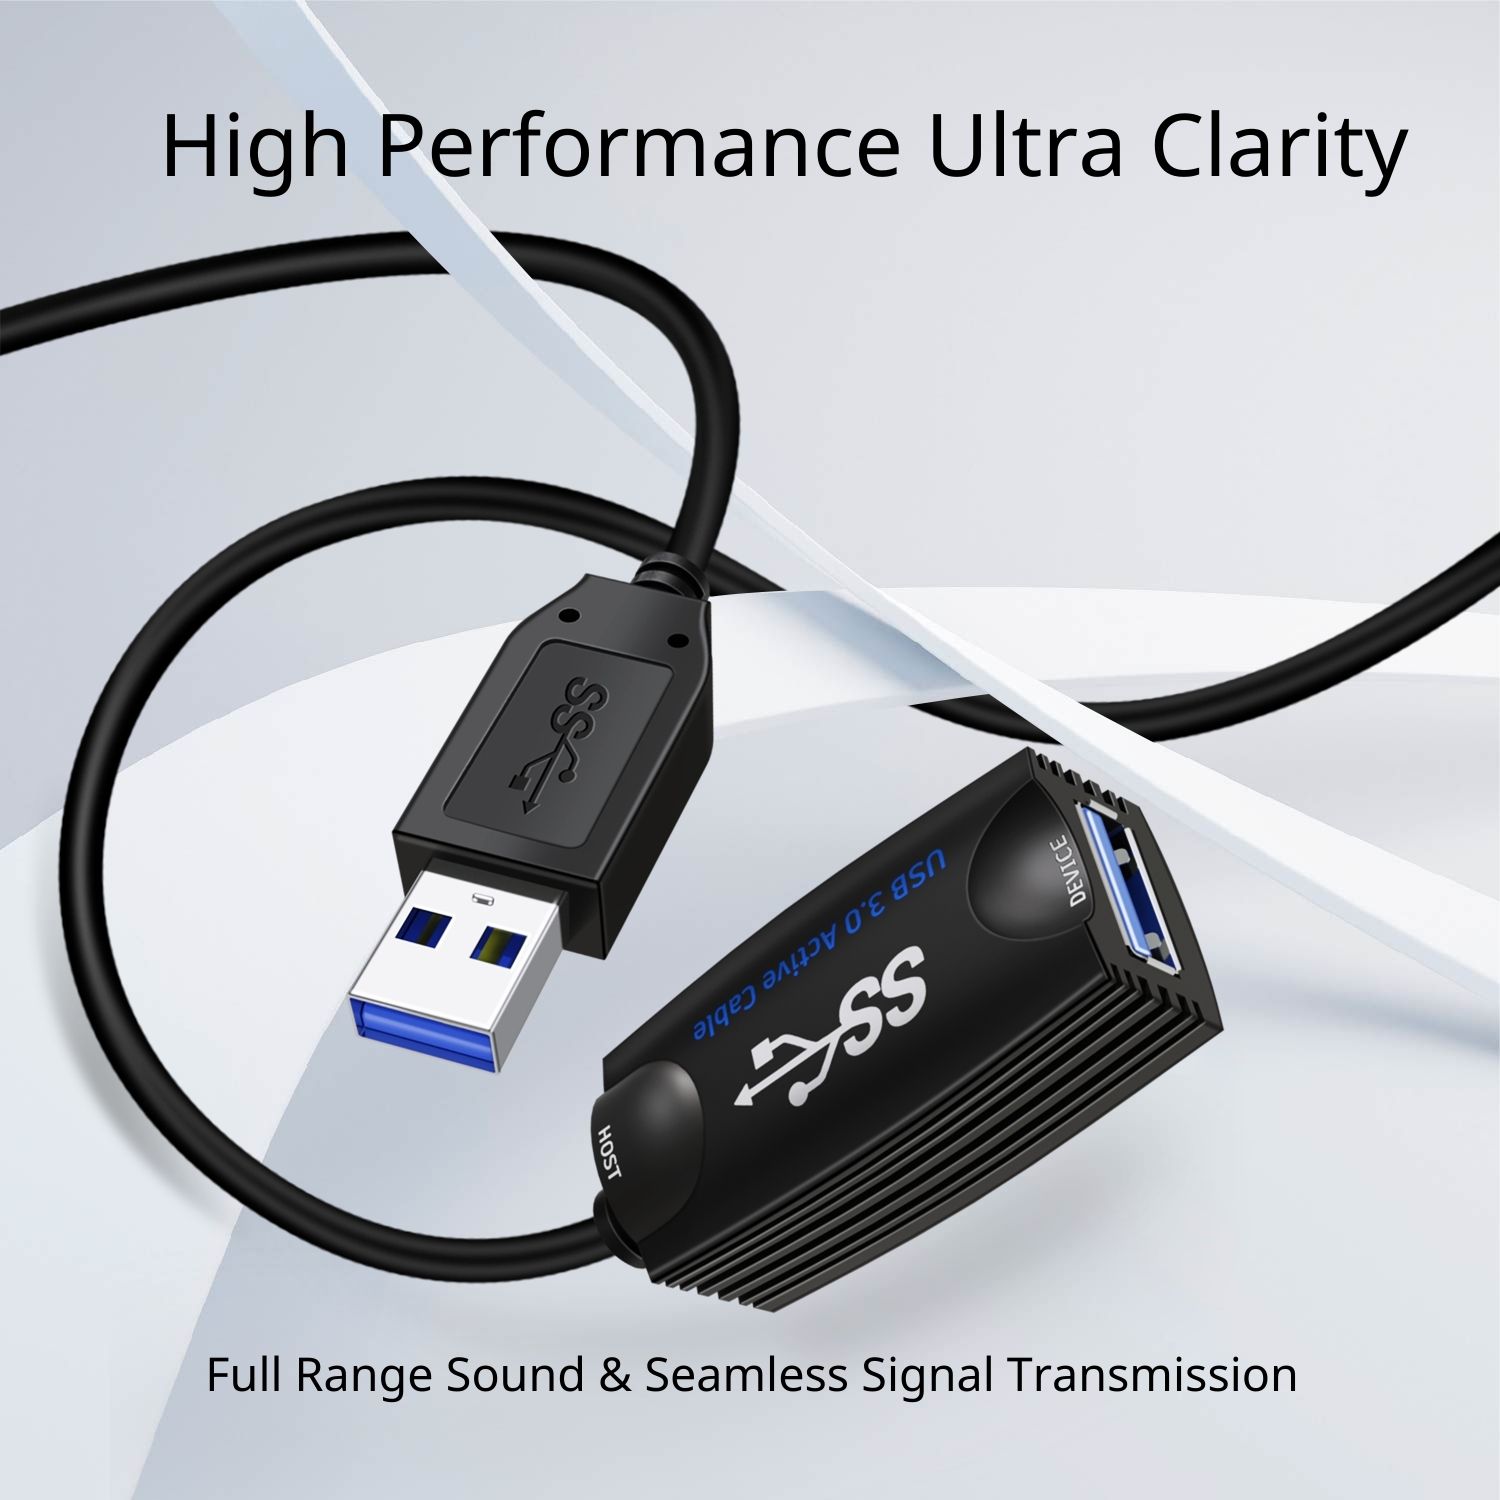 Long-distance Data Transfer - USB 3.0 Active Extension Cable features signal booster retimer design powered by built-in USB bus, perfectly avoid attenuation for long-distance data transfer, great for extending the USB connection from popular VR devices such as Oculus Rift Sensor, Oculus Quest Link, Playstation VR, HTC Vive, Valve Index VR, CCTV camera, Hard Drive, and most popular USB devices